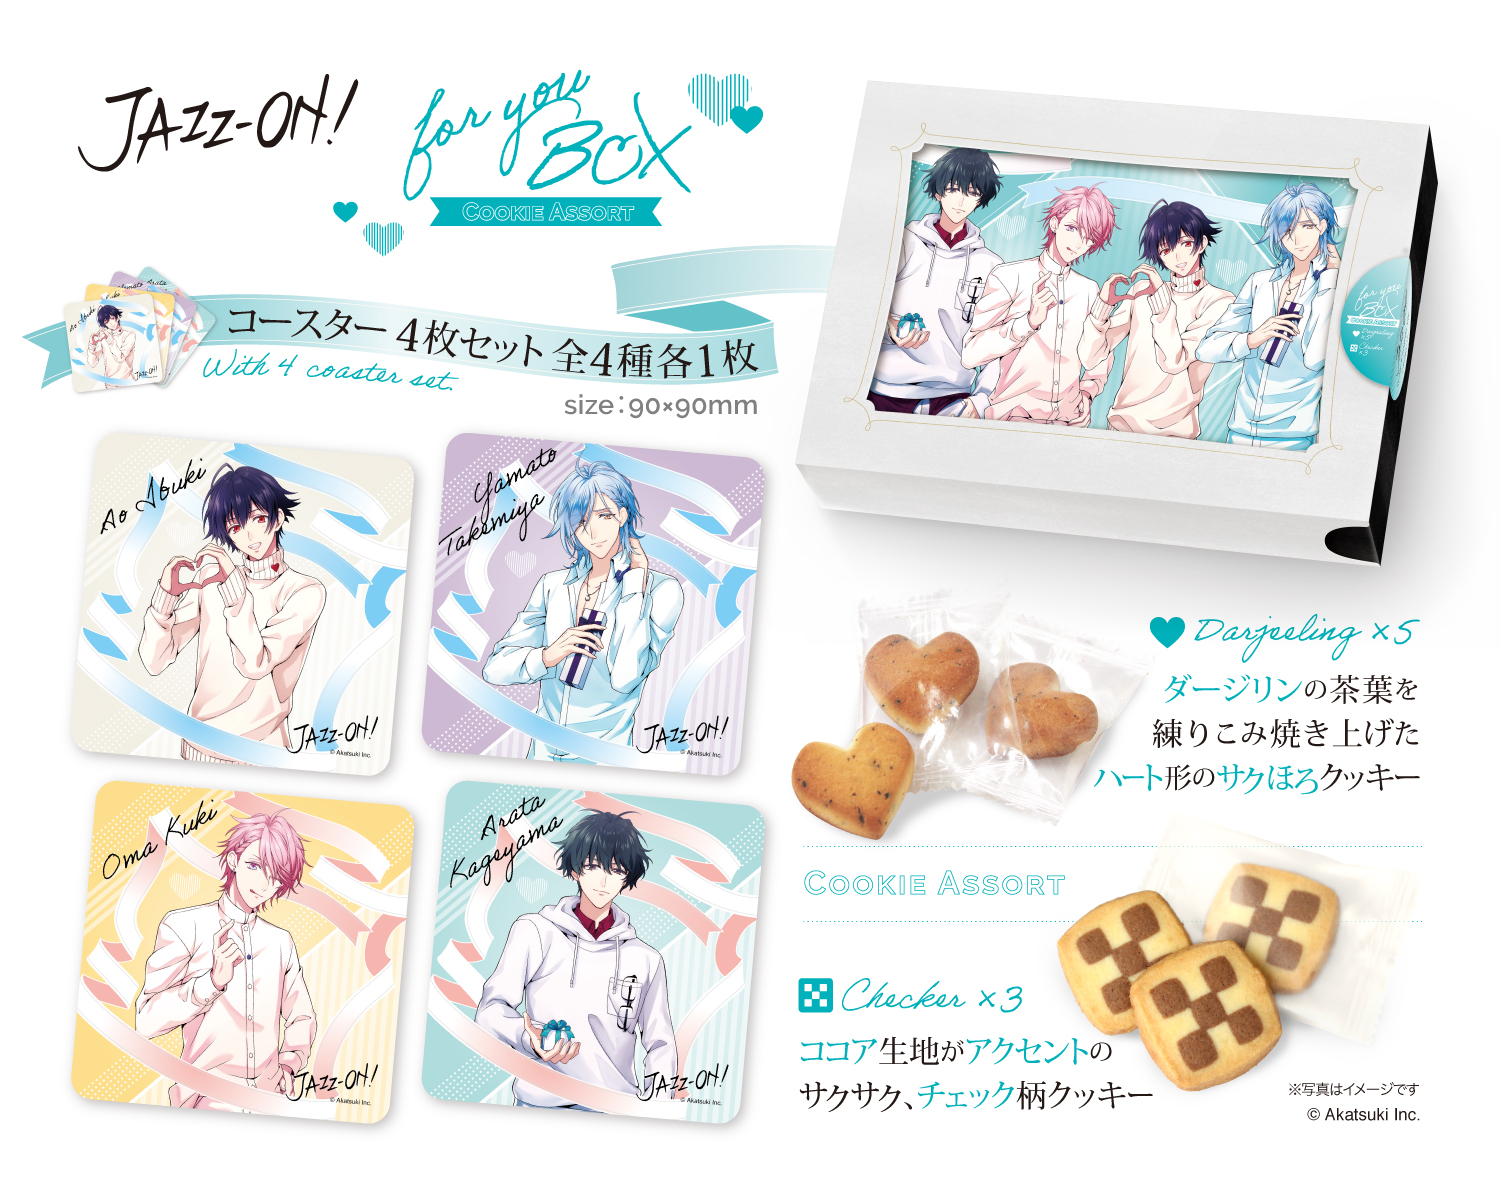 「JAZZ-ON! × OIOI Limited Shop」JAZZ-ON! for you Box(全1種)